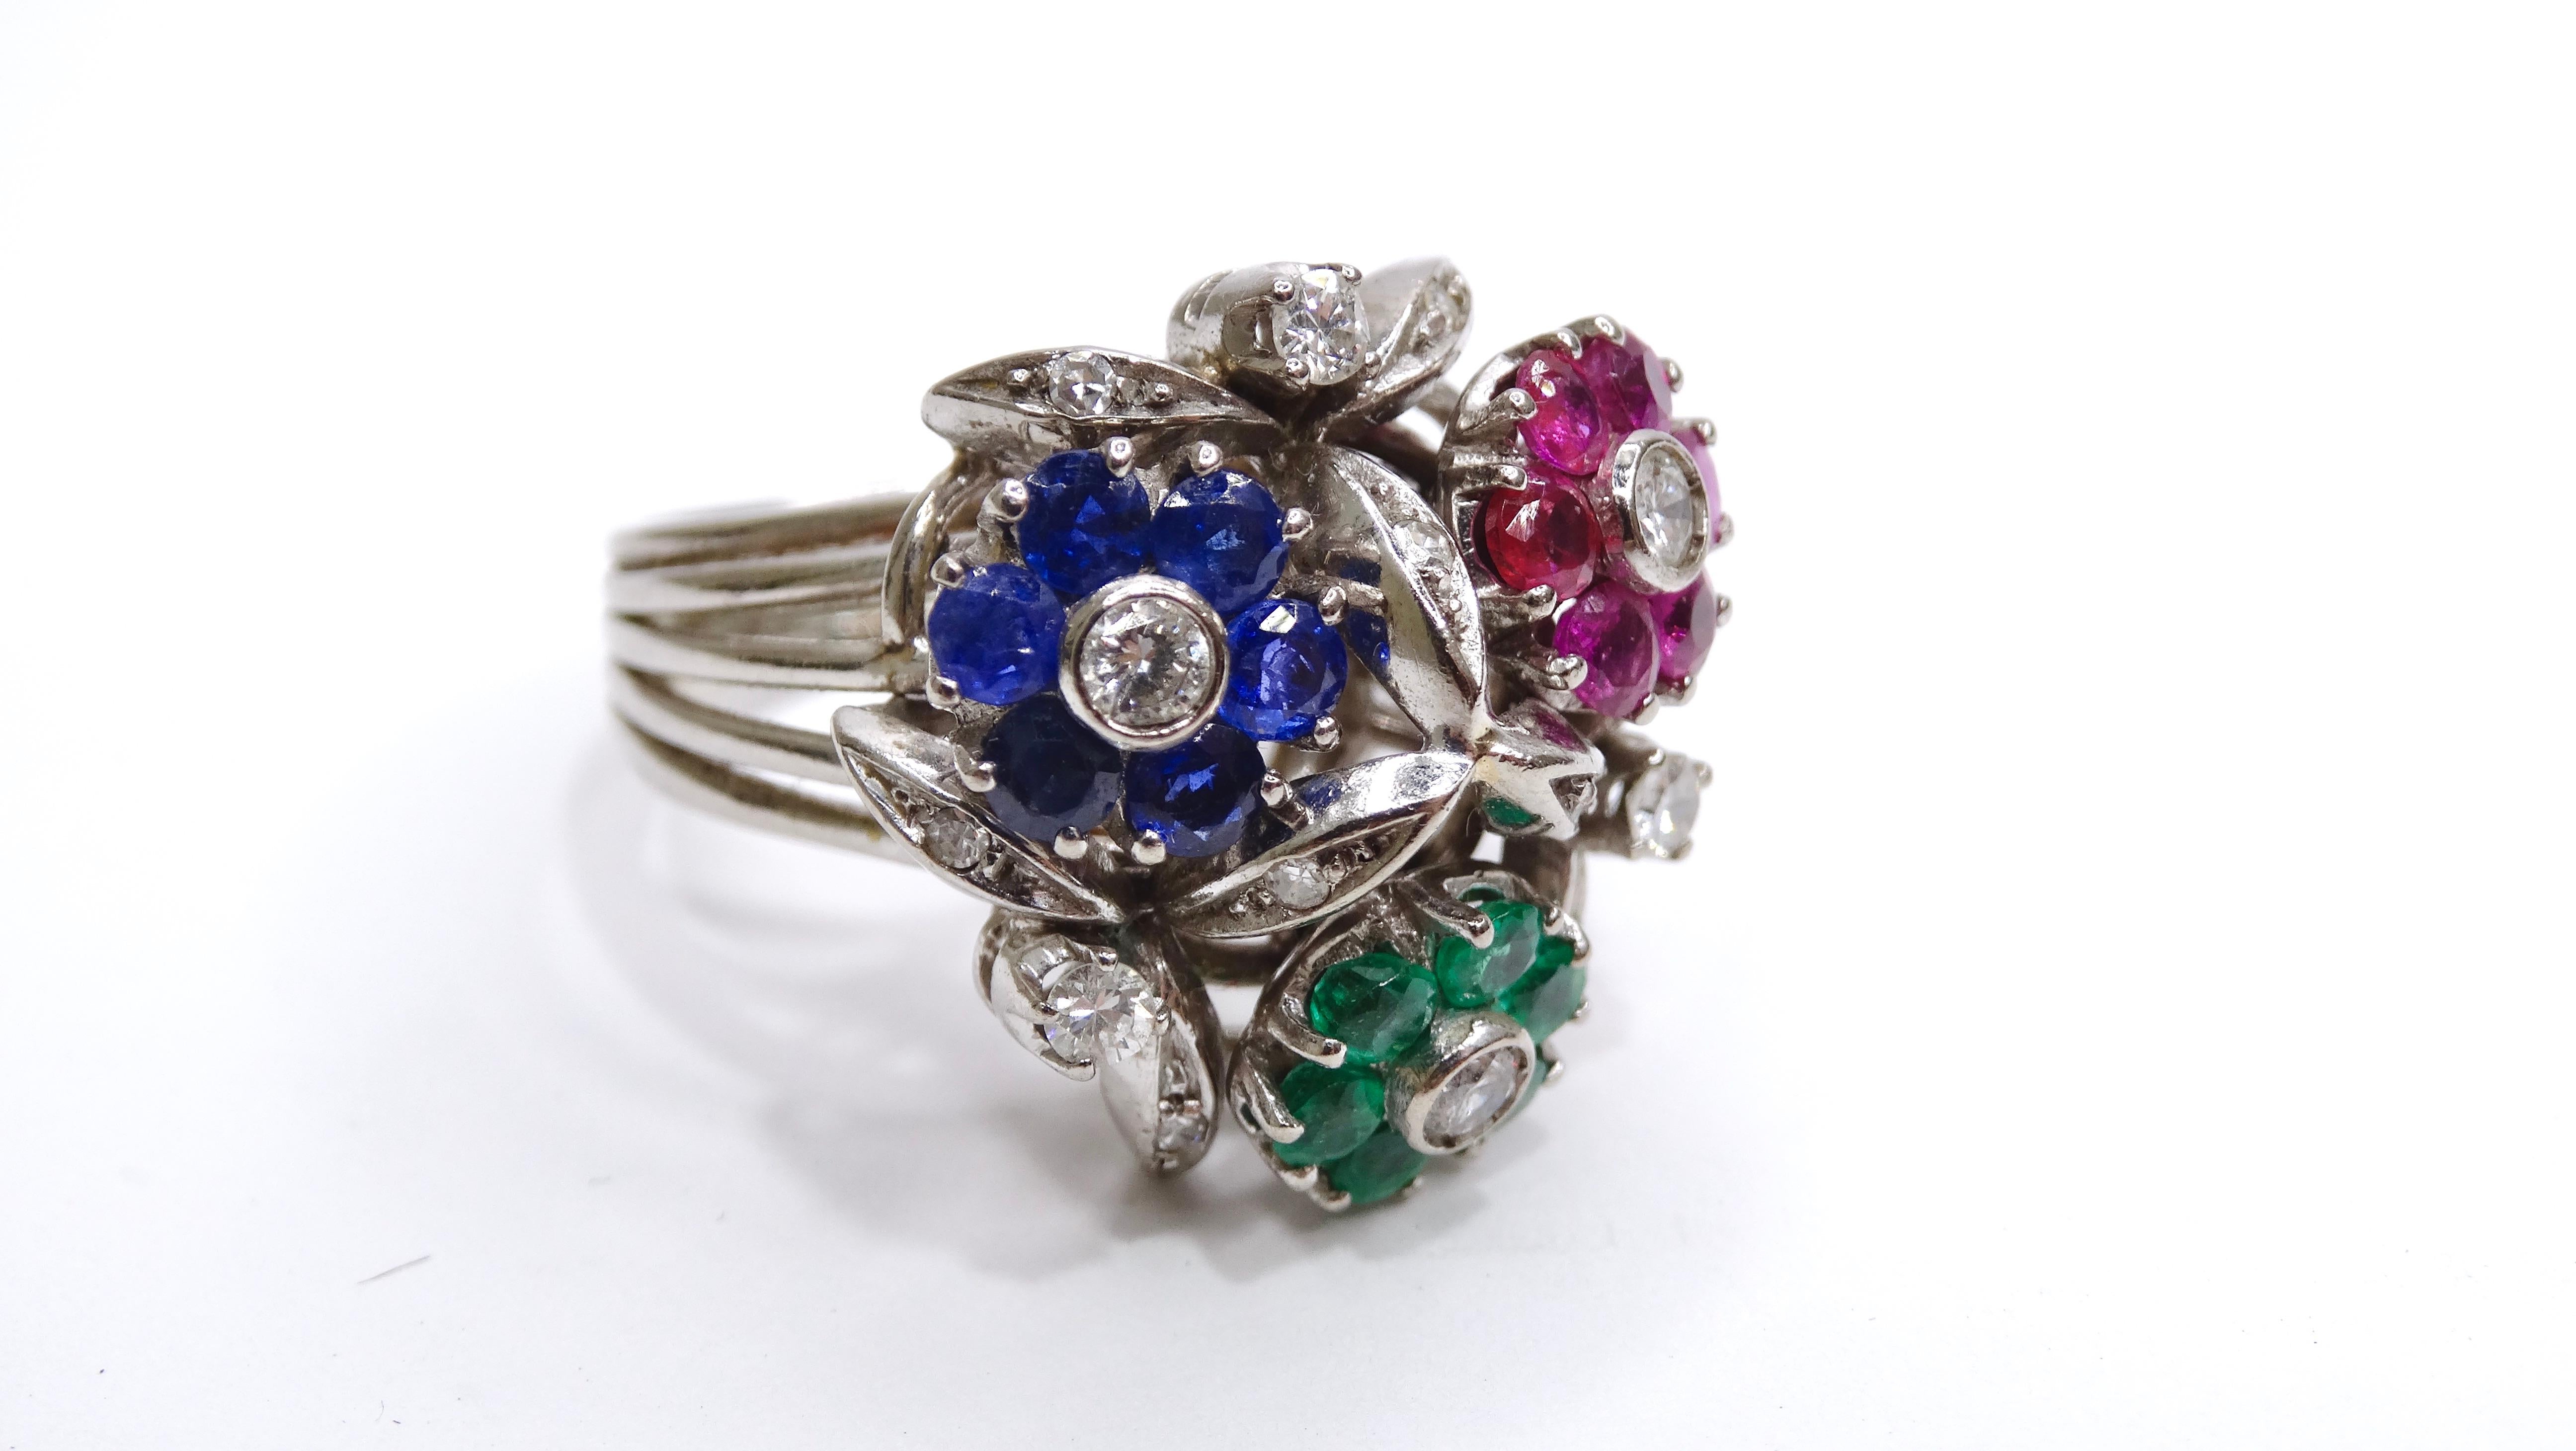 Bring a feminine flair to your ensemble with this ultra-rare VCA cocktail ring. Circa 1950's, this cocktail ring is made from platinum and weighs 12.09 total grams. This beautiful ring includes 6 Colombian emeralds  (0.45 ctw), 6 rubies (0.7ctw), 6